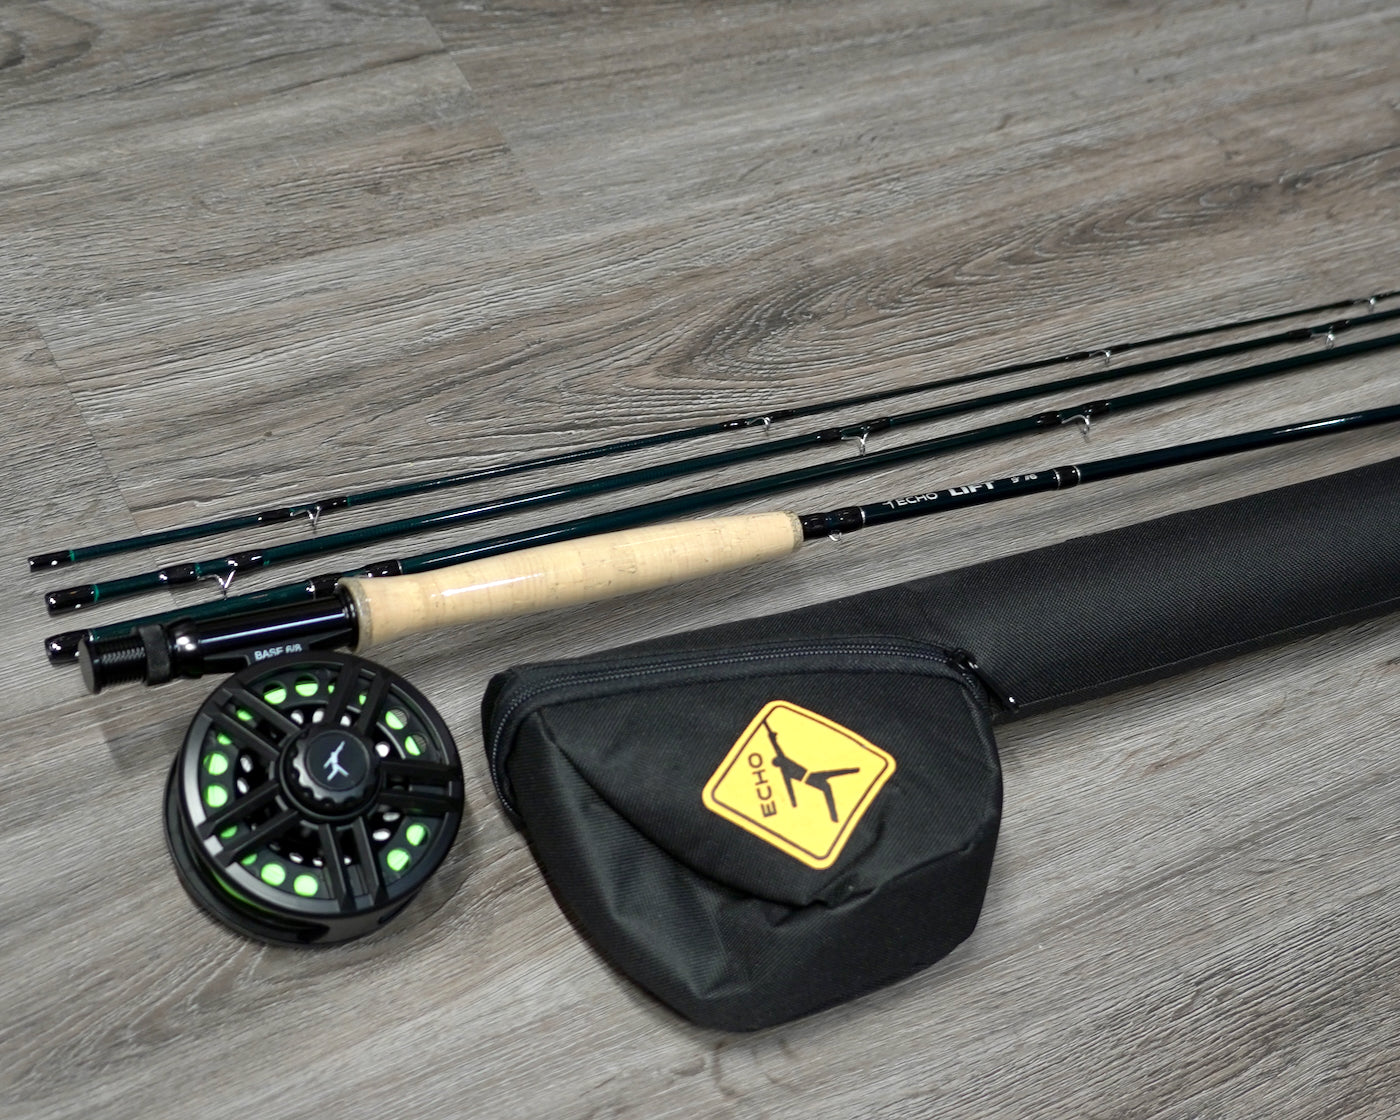 ECHO Lift Fly Rod and Reel Combo